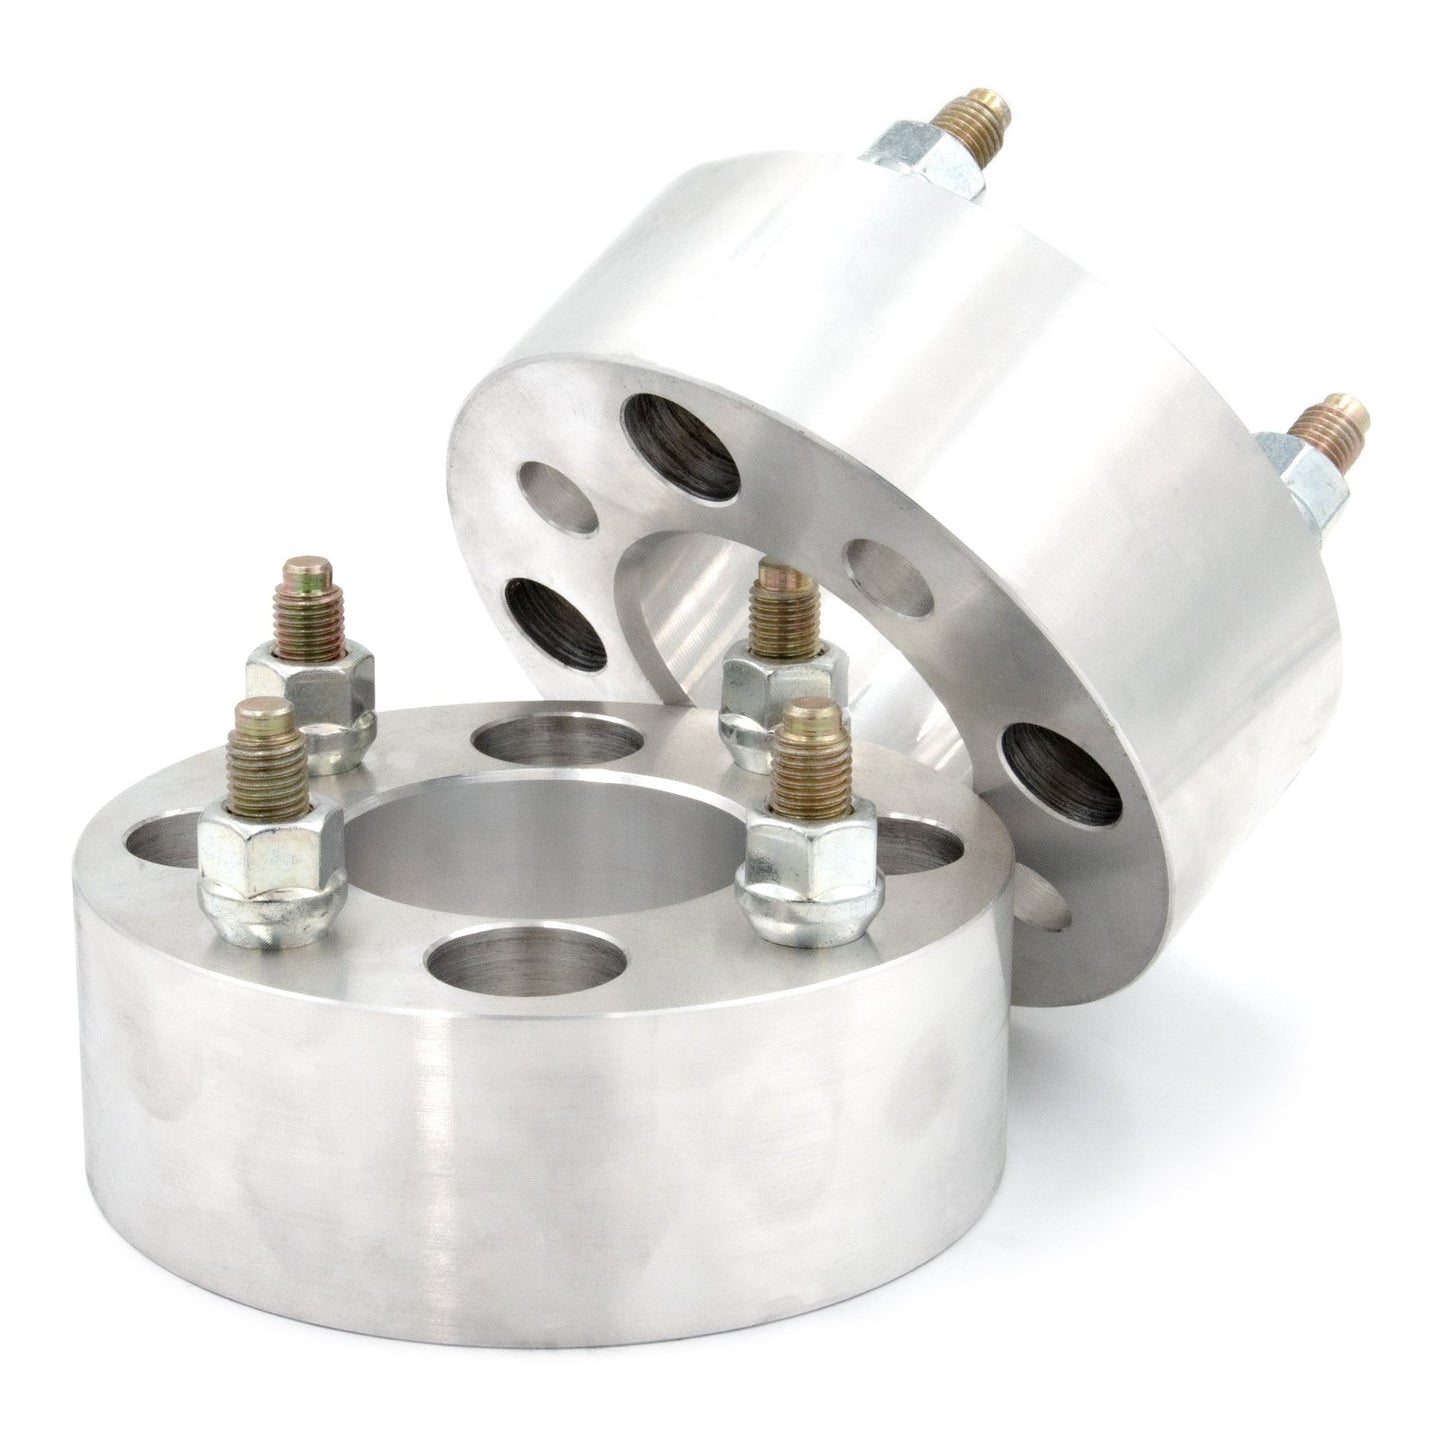 4x144 to 4x156 Wheel Spacer/Adapter - Thickness: 3/4"- 4"